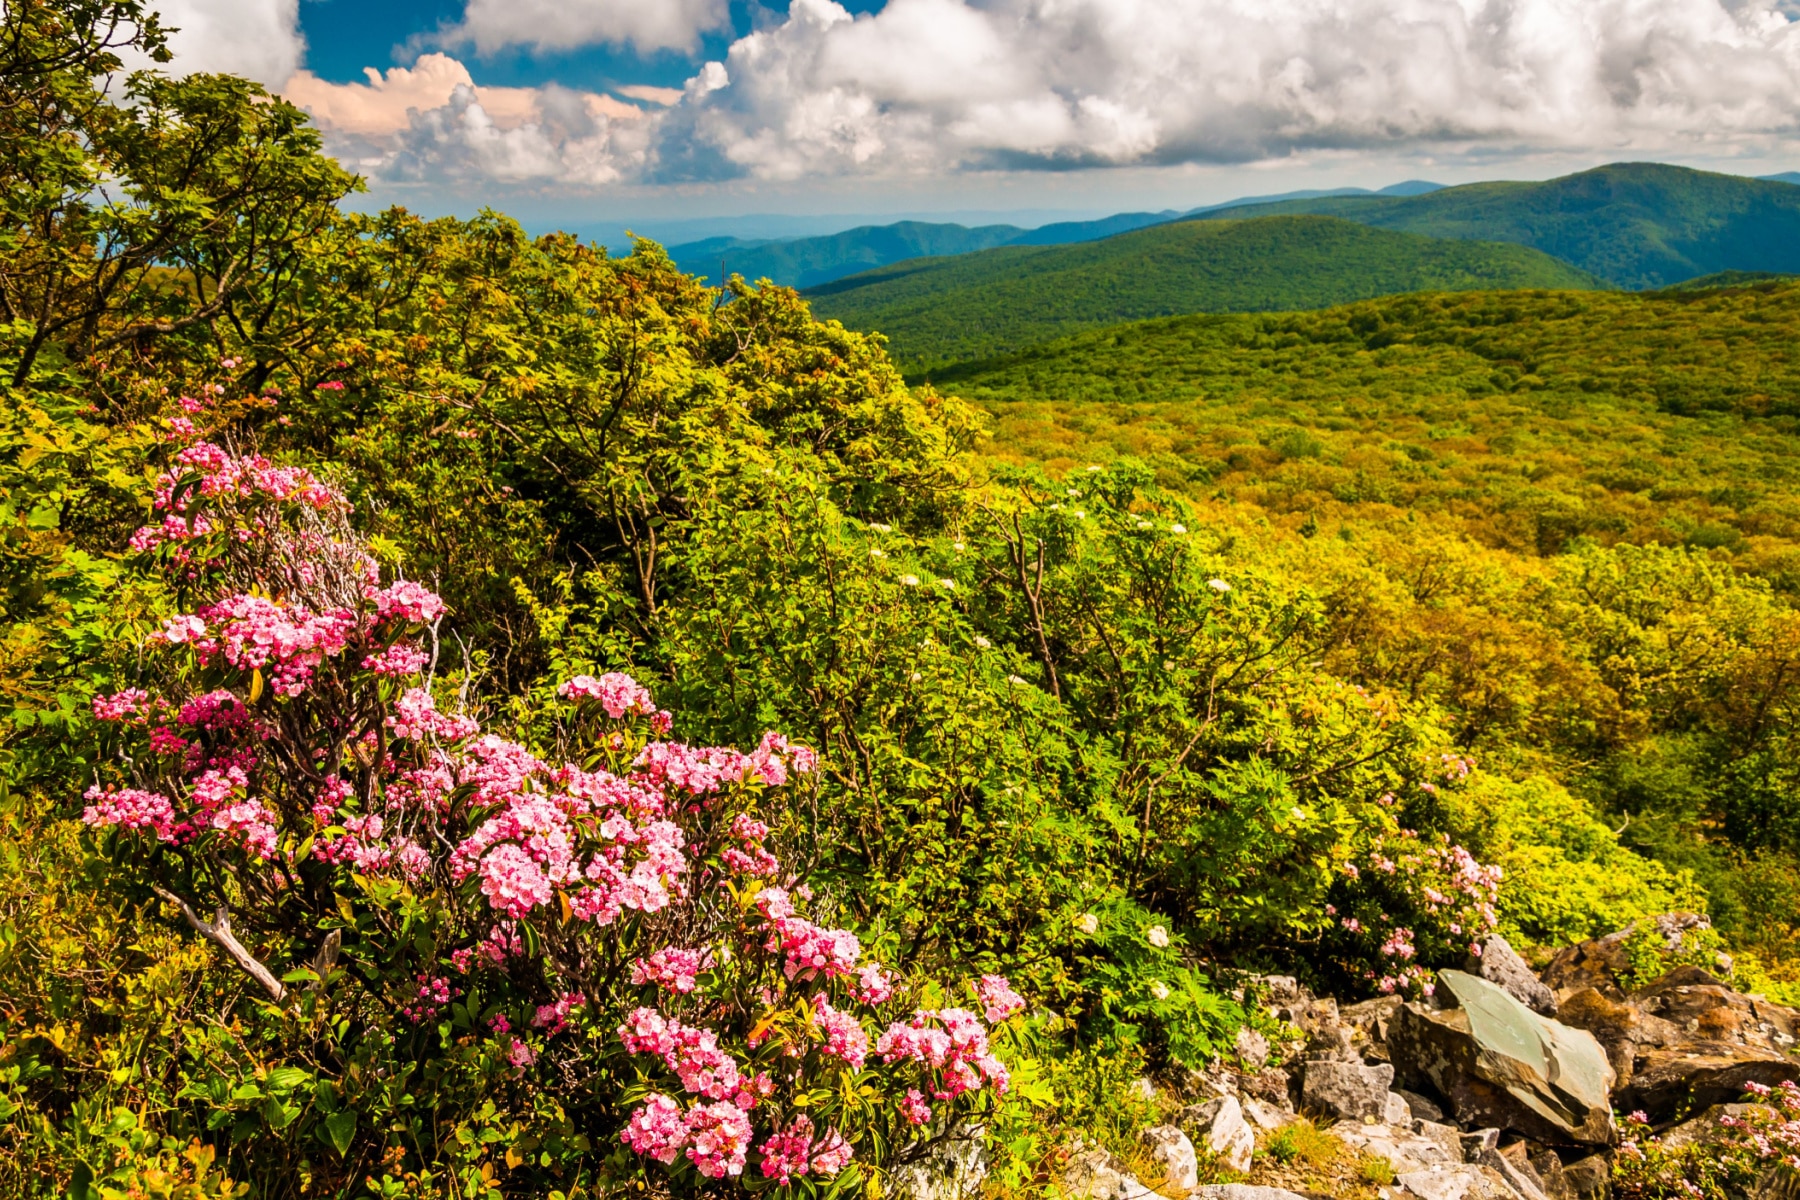 Shenandoah National Park in April, with pink wildflowers growing on the lush landscape.